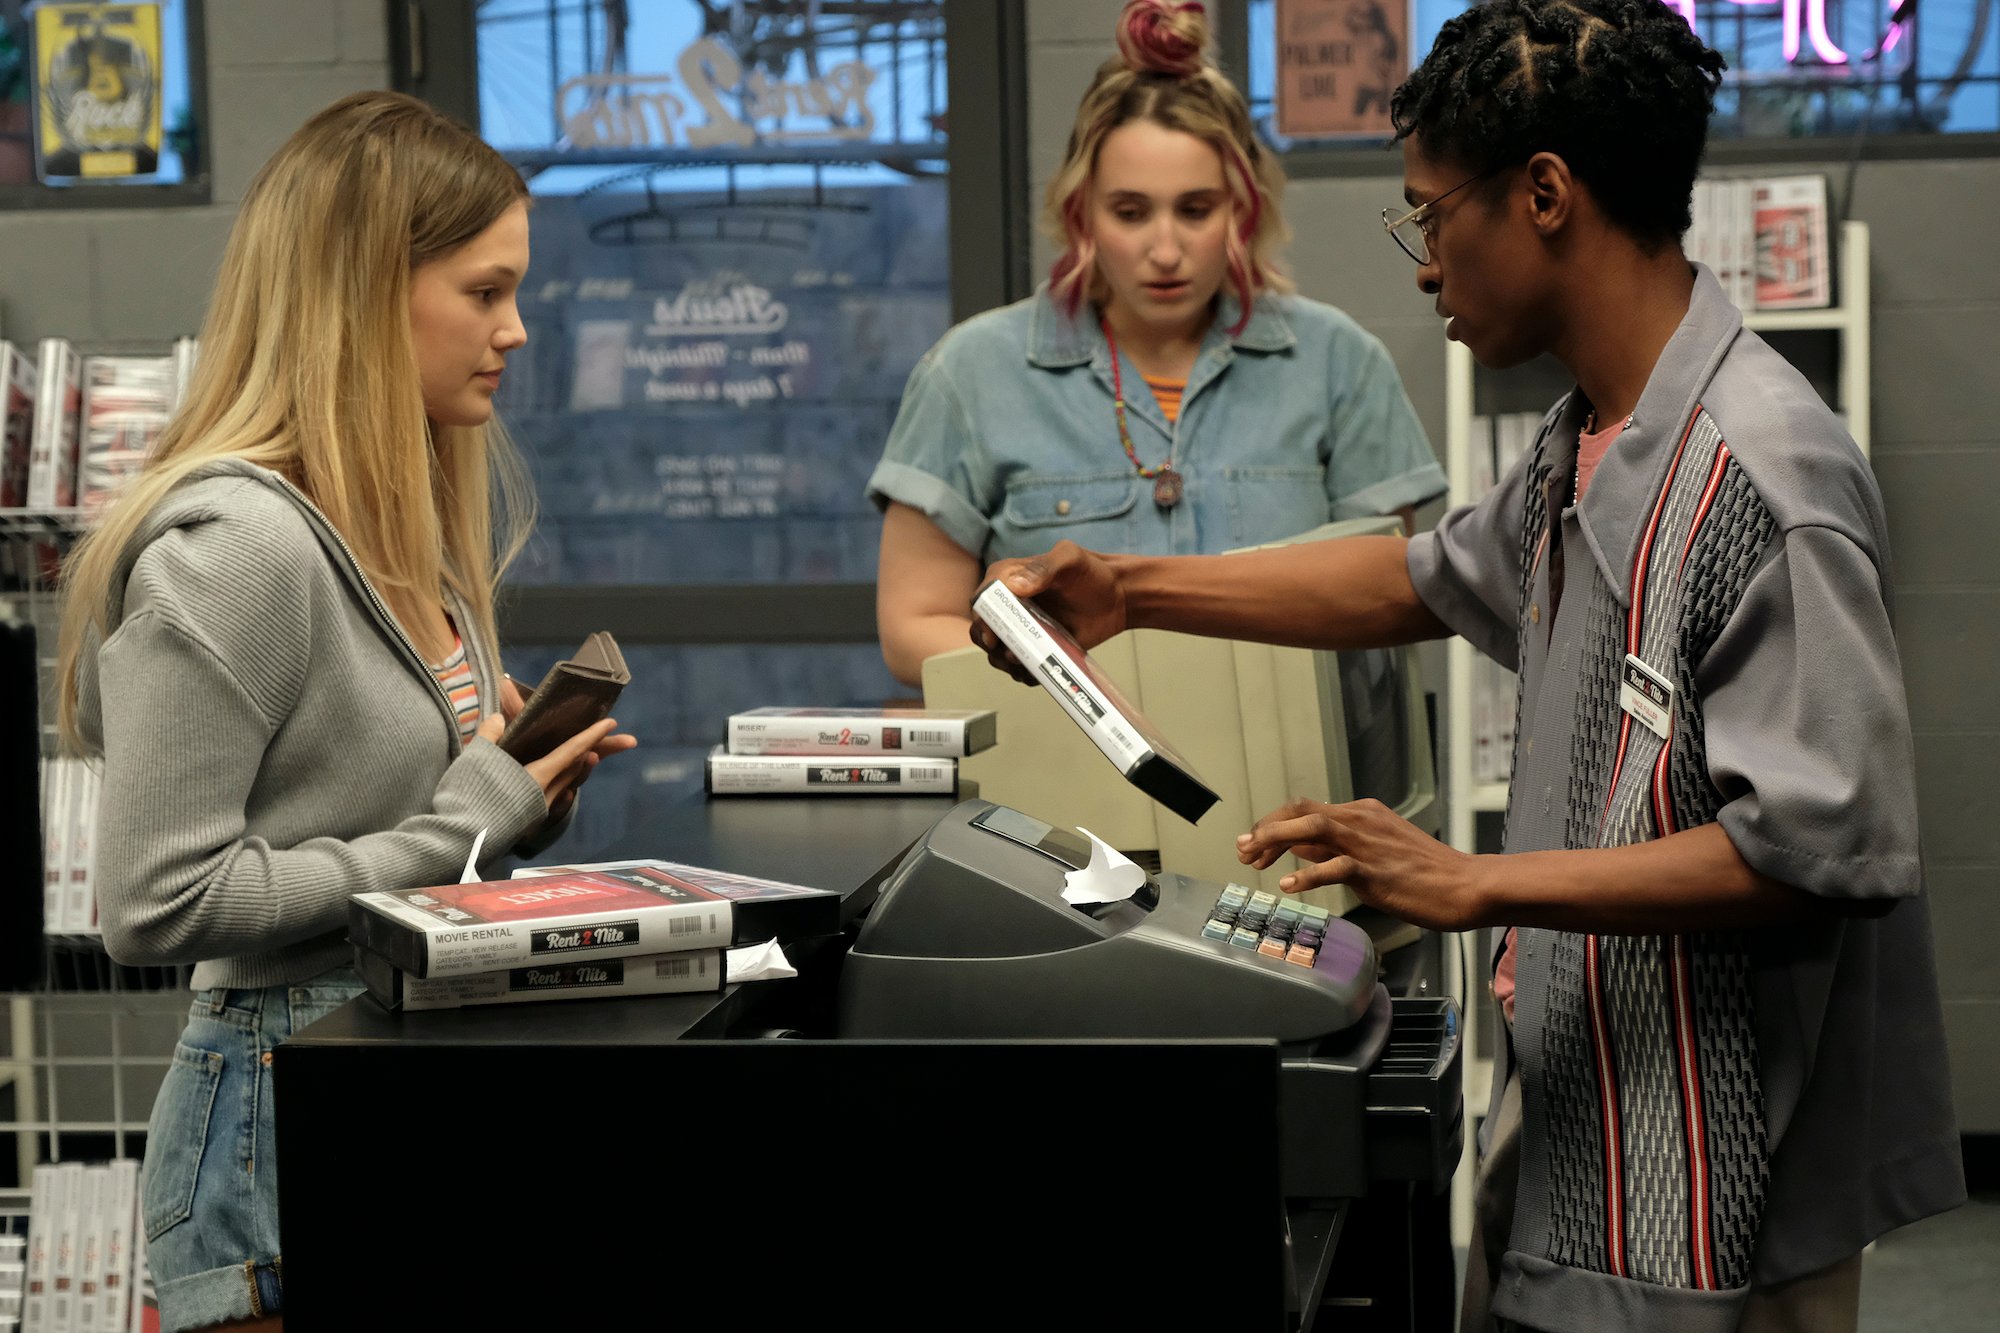 'CRUEL SUMMER' Episode 3, "Off With a Bang" OLIVIA HOLT as Kate Wallis, HARLEY QUINN SMITH as Mallory, and ALLIUS BARNES as Vince in the Freeform show